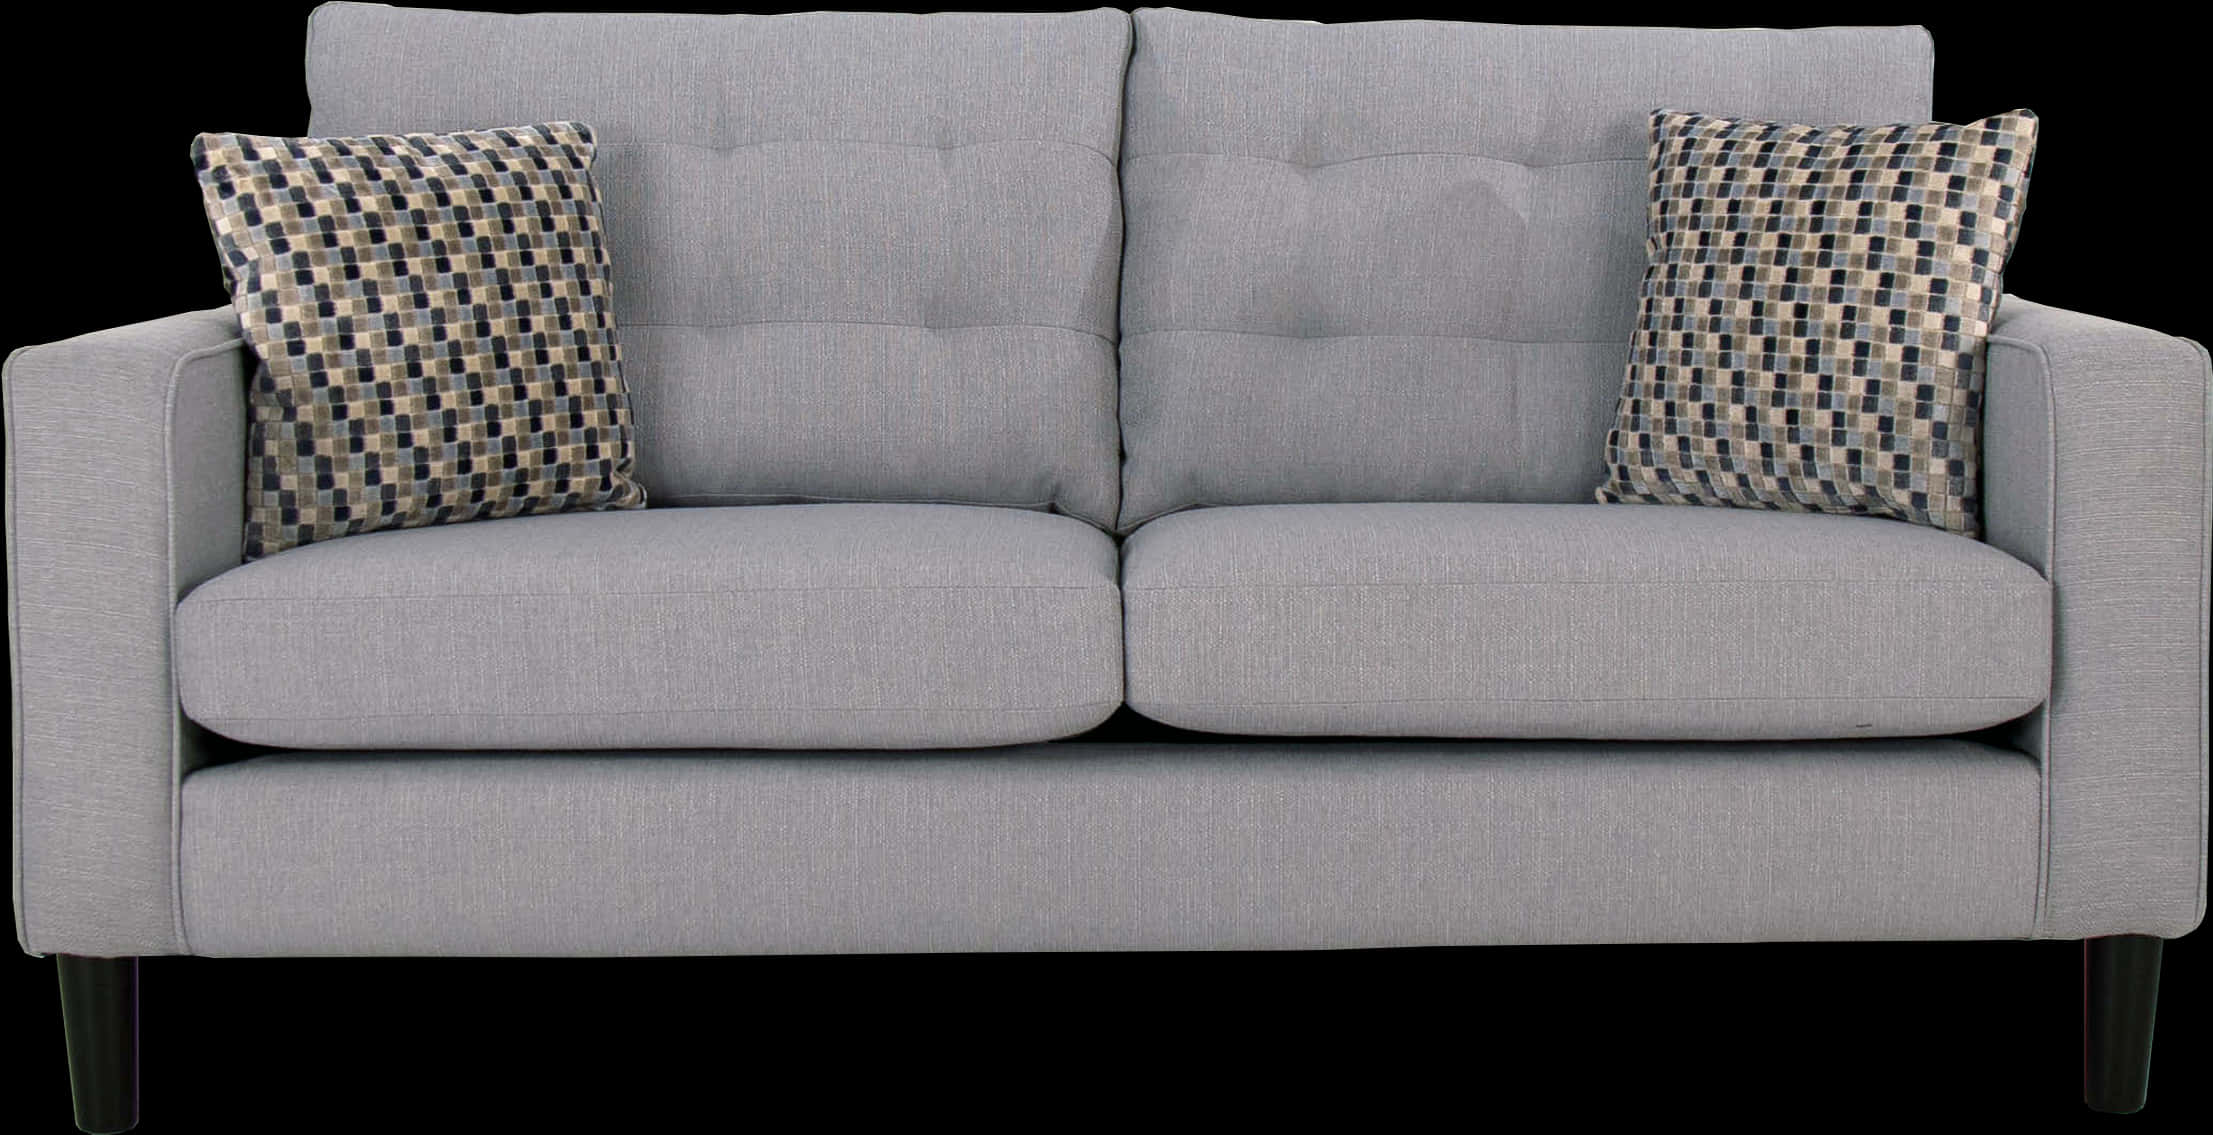 A Grey Couch With Pillows